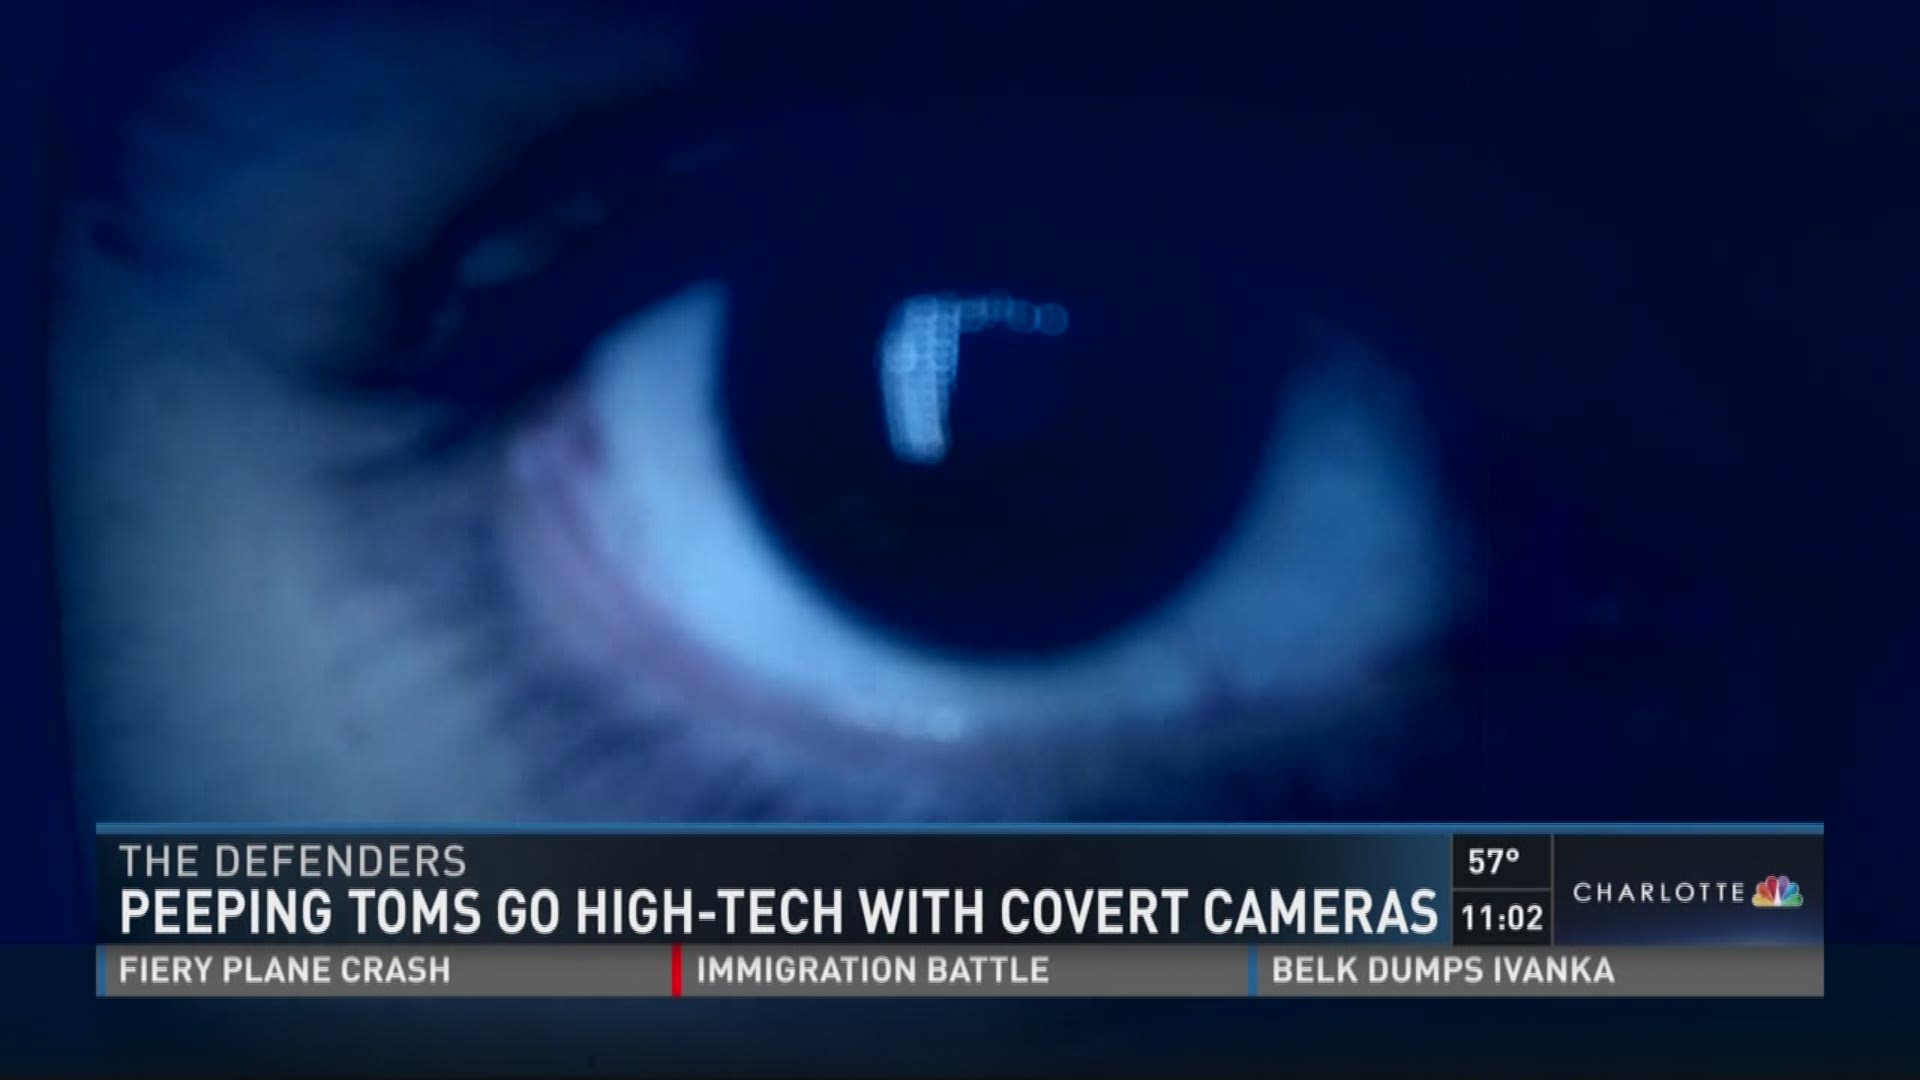 You would never know it was there Peeping Toms go high-tech with covert cameras wcnc pic